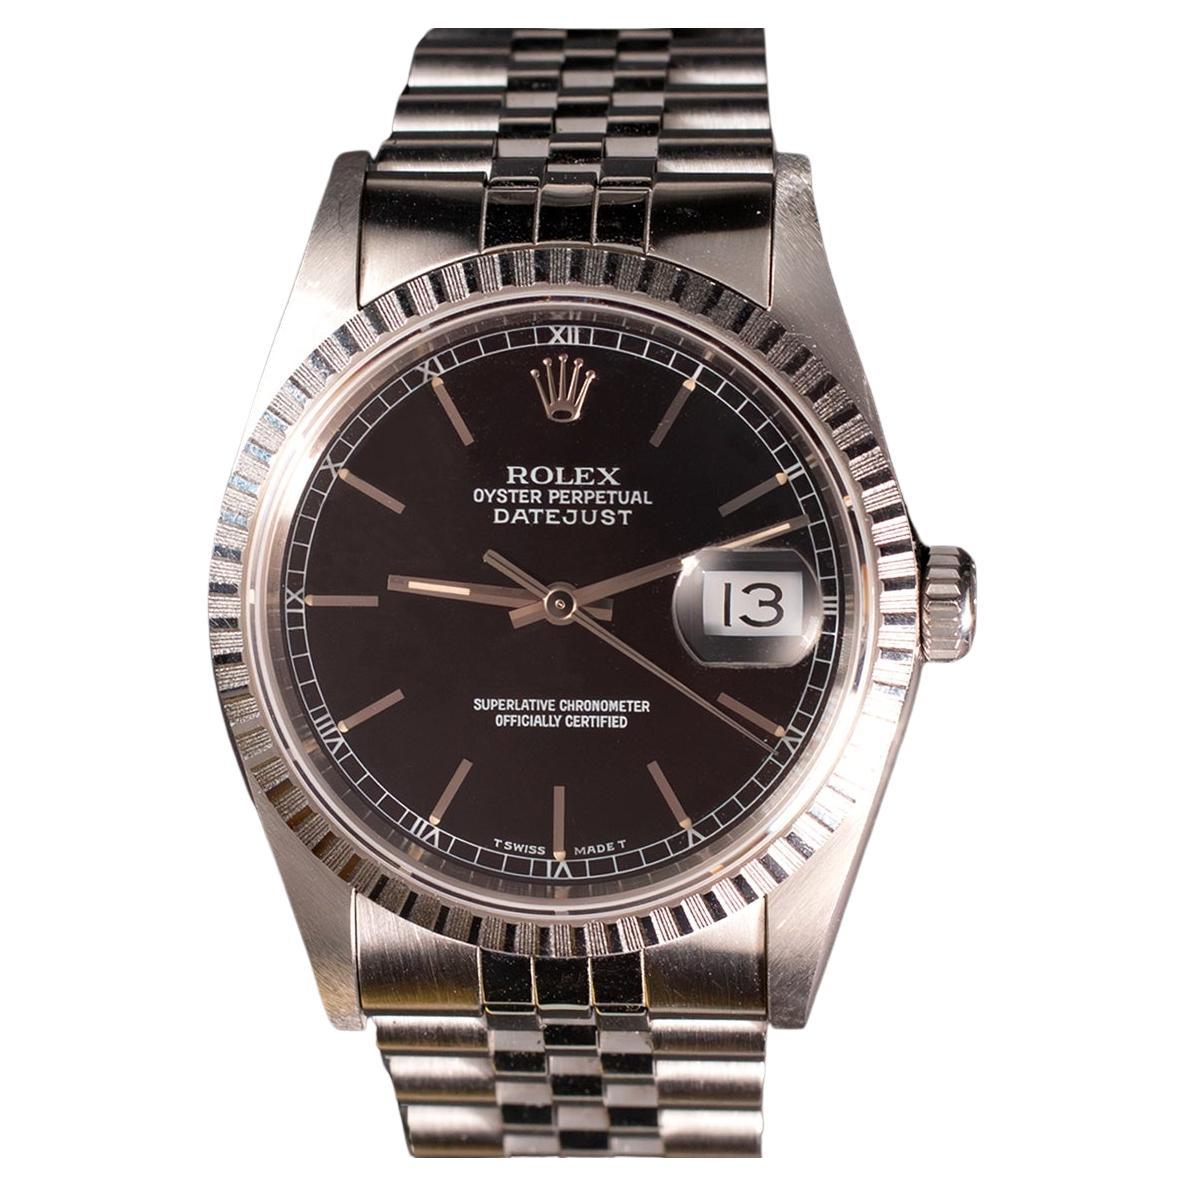 Rolex Steel Oyster Perpetual Datejust Black Dial 16220 Watch w/Paper & Tag, 1993 For Sale